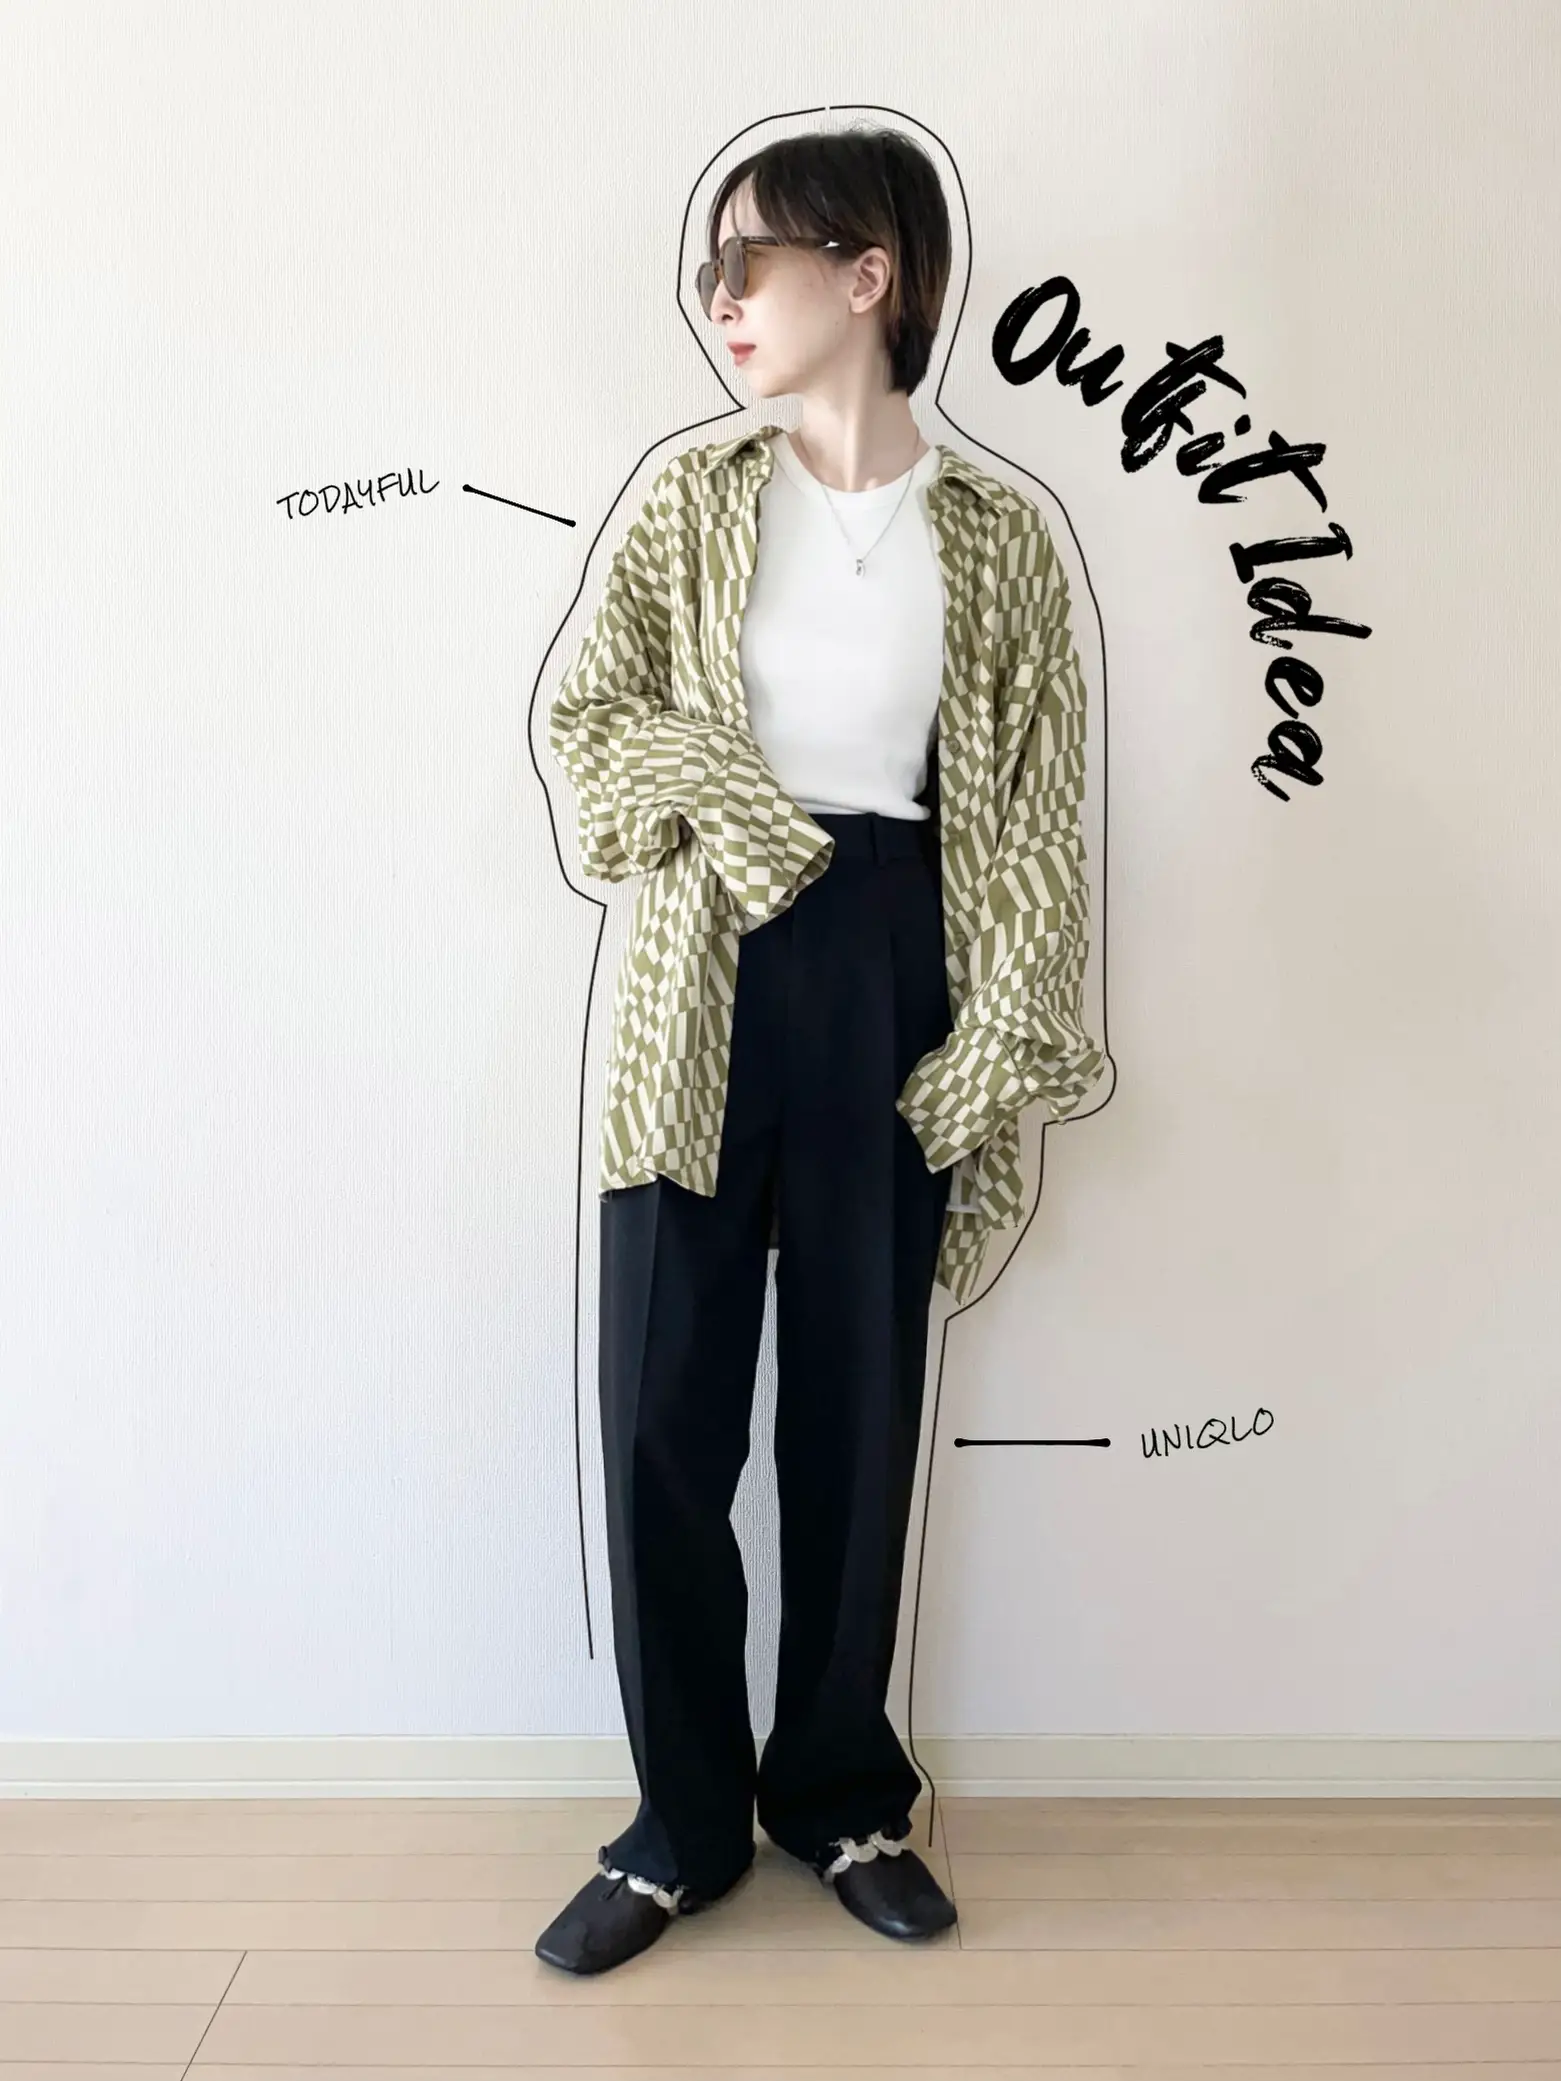 TODAY FUL GEOMETRIC SHIRT COORDINATE🍁 | Gallery posted by ANY